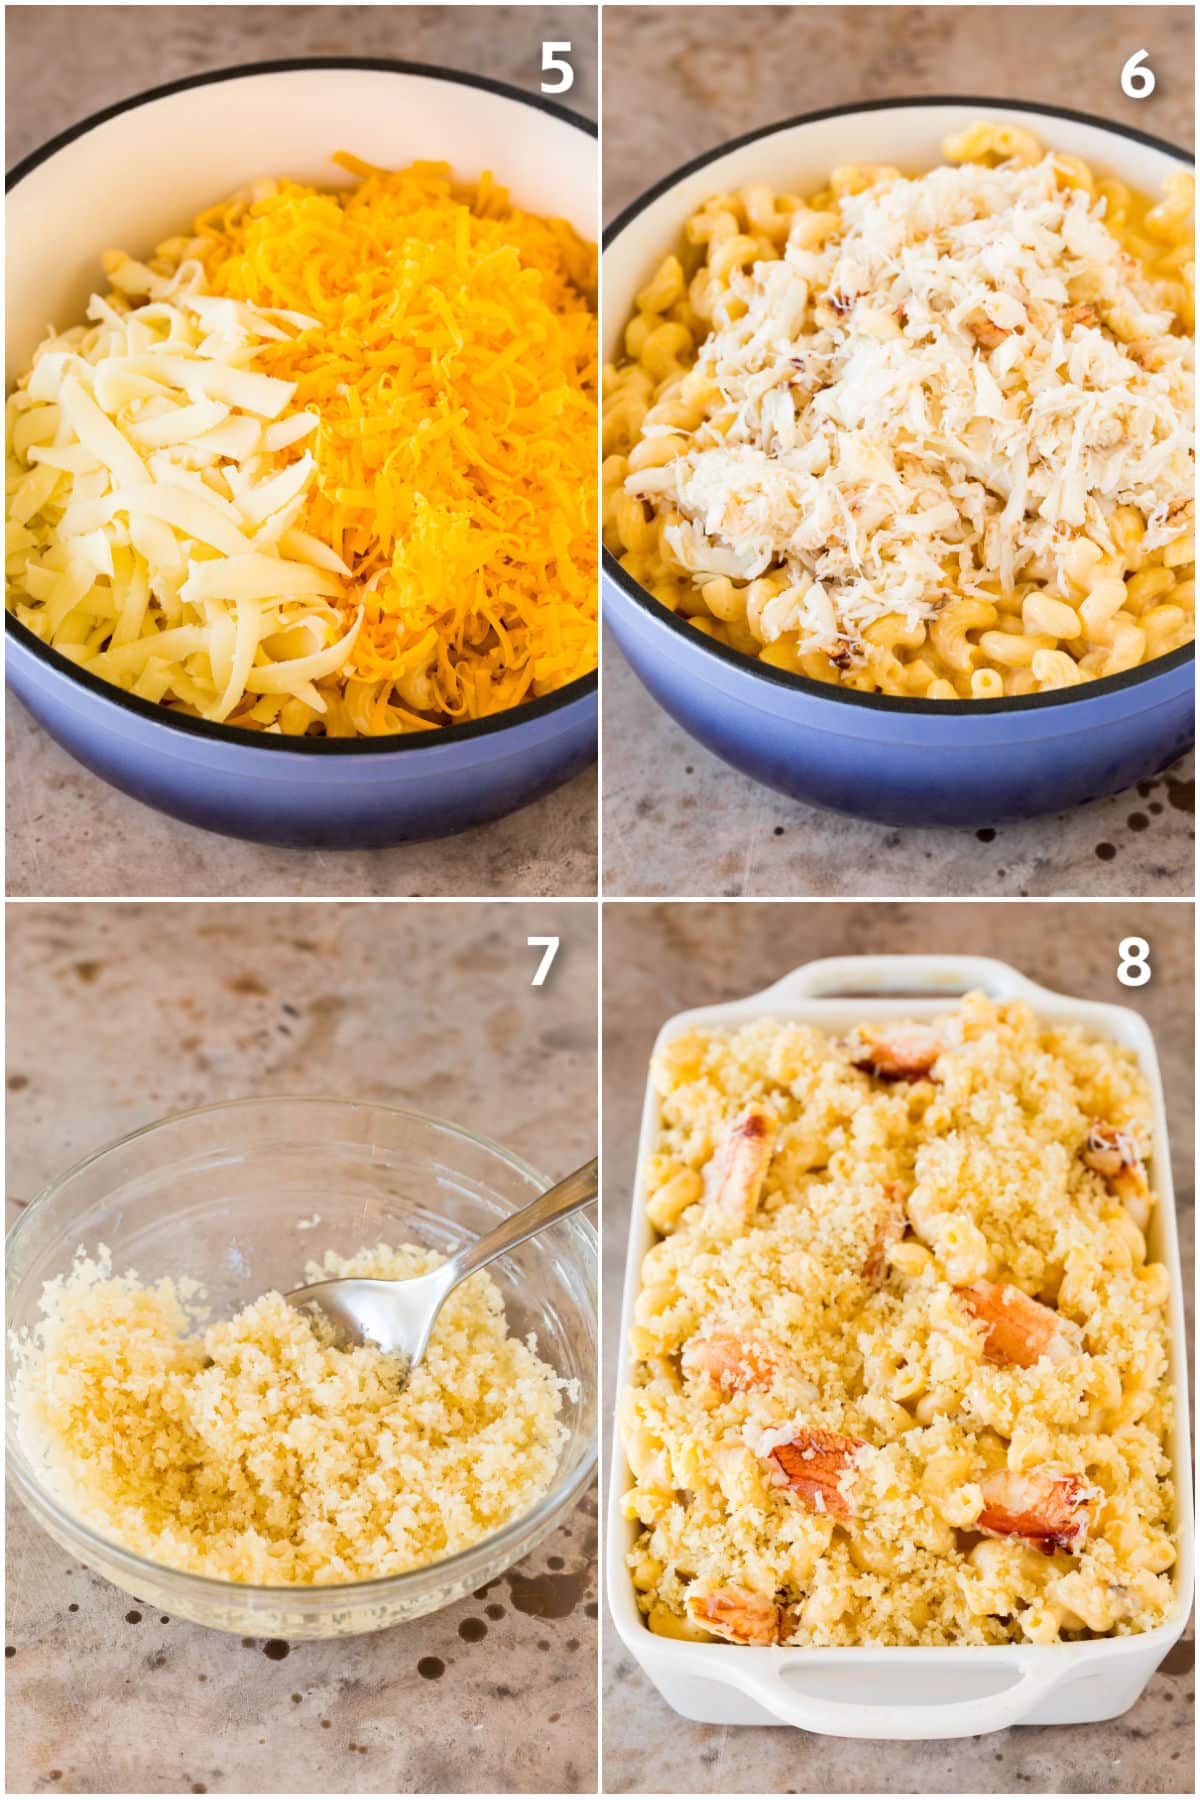 Step by step photos showing cheese and crab being added to cooked pasta.